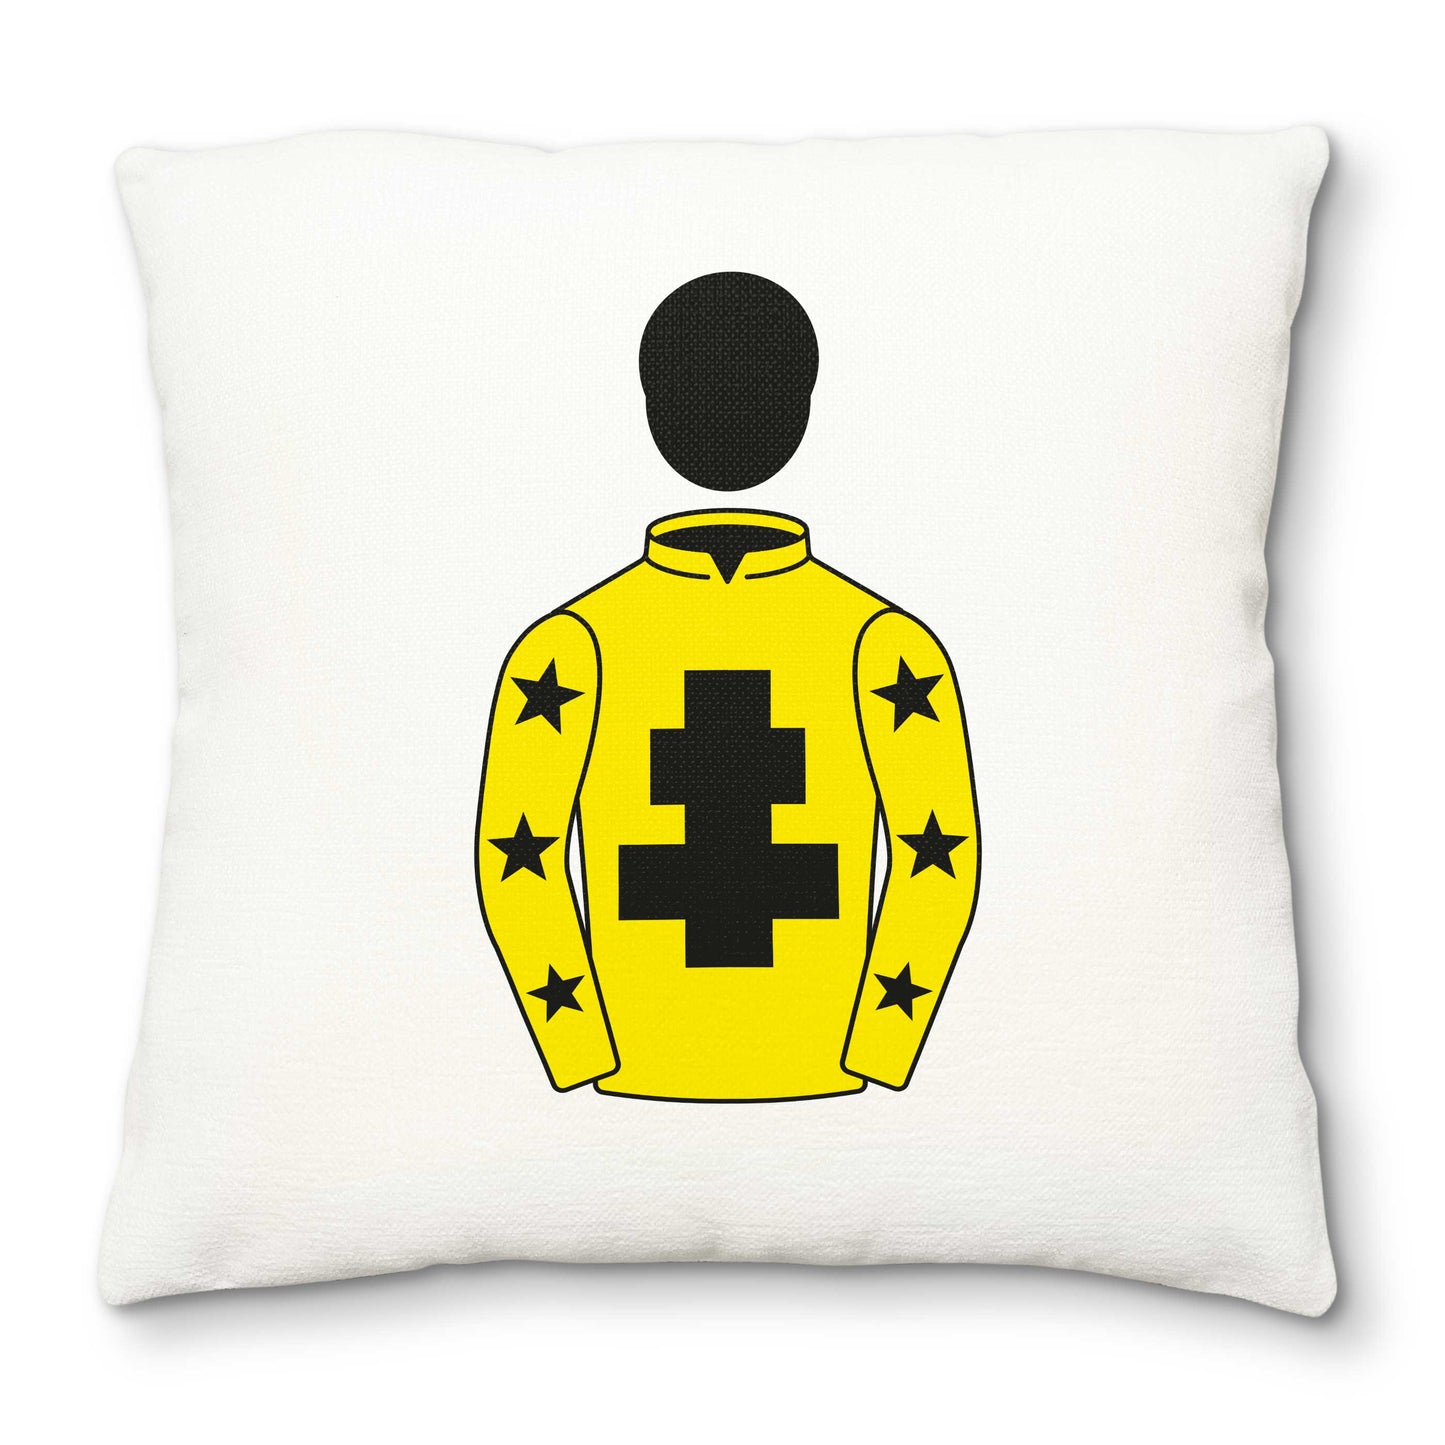 Niall Farrell And Friends Deluxe Cushion Cover - Deluxe Cushion Cover - Hacked Up